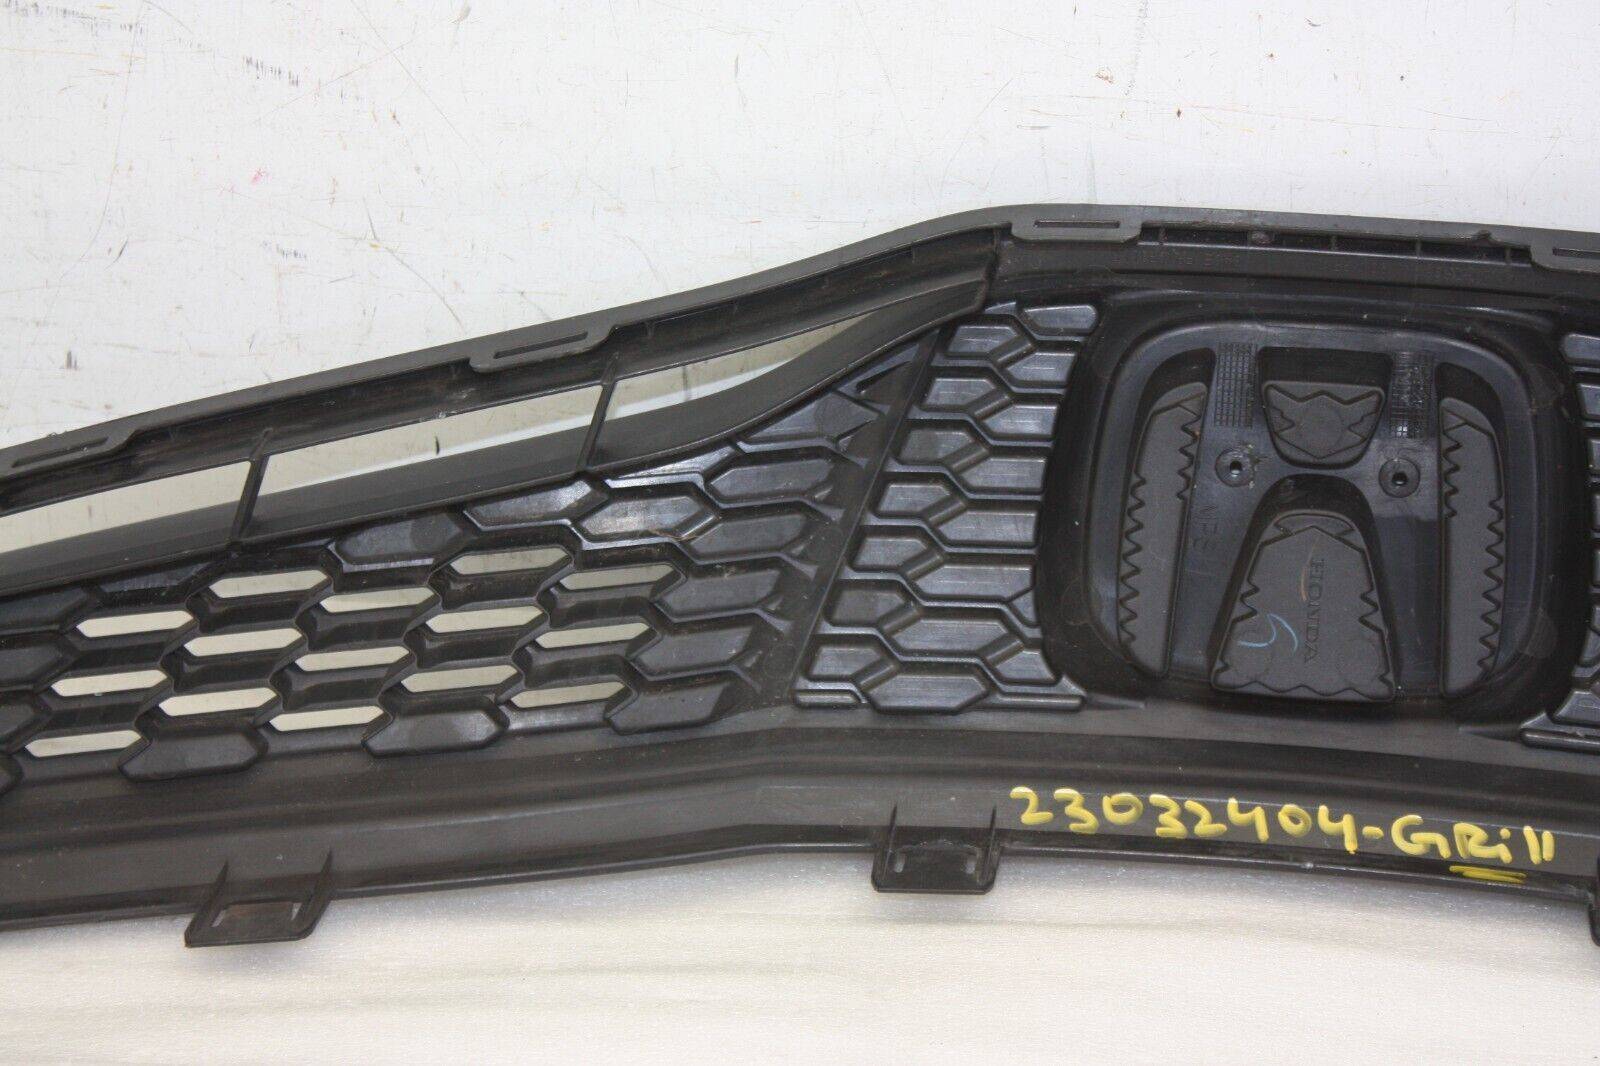 Honda-Jazz-Front-Bumper-Grill-2011-TO-2015-71121-TF0-90-Genuine-176301561996-14